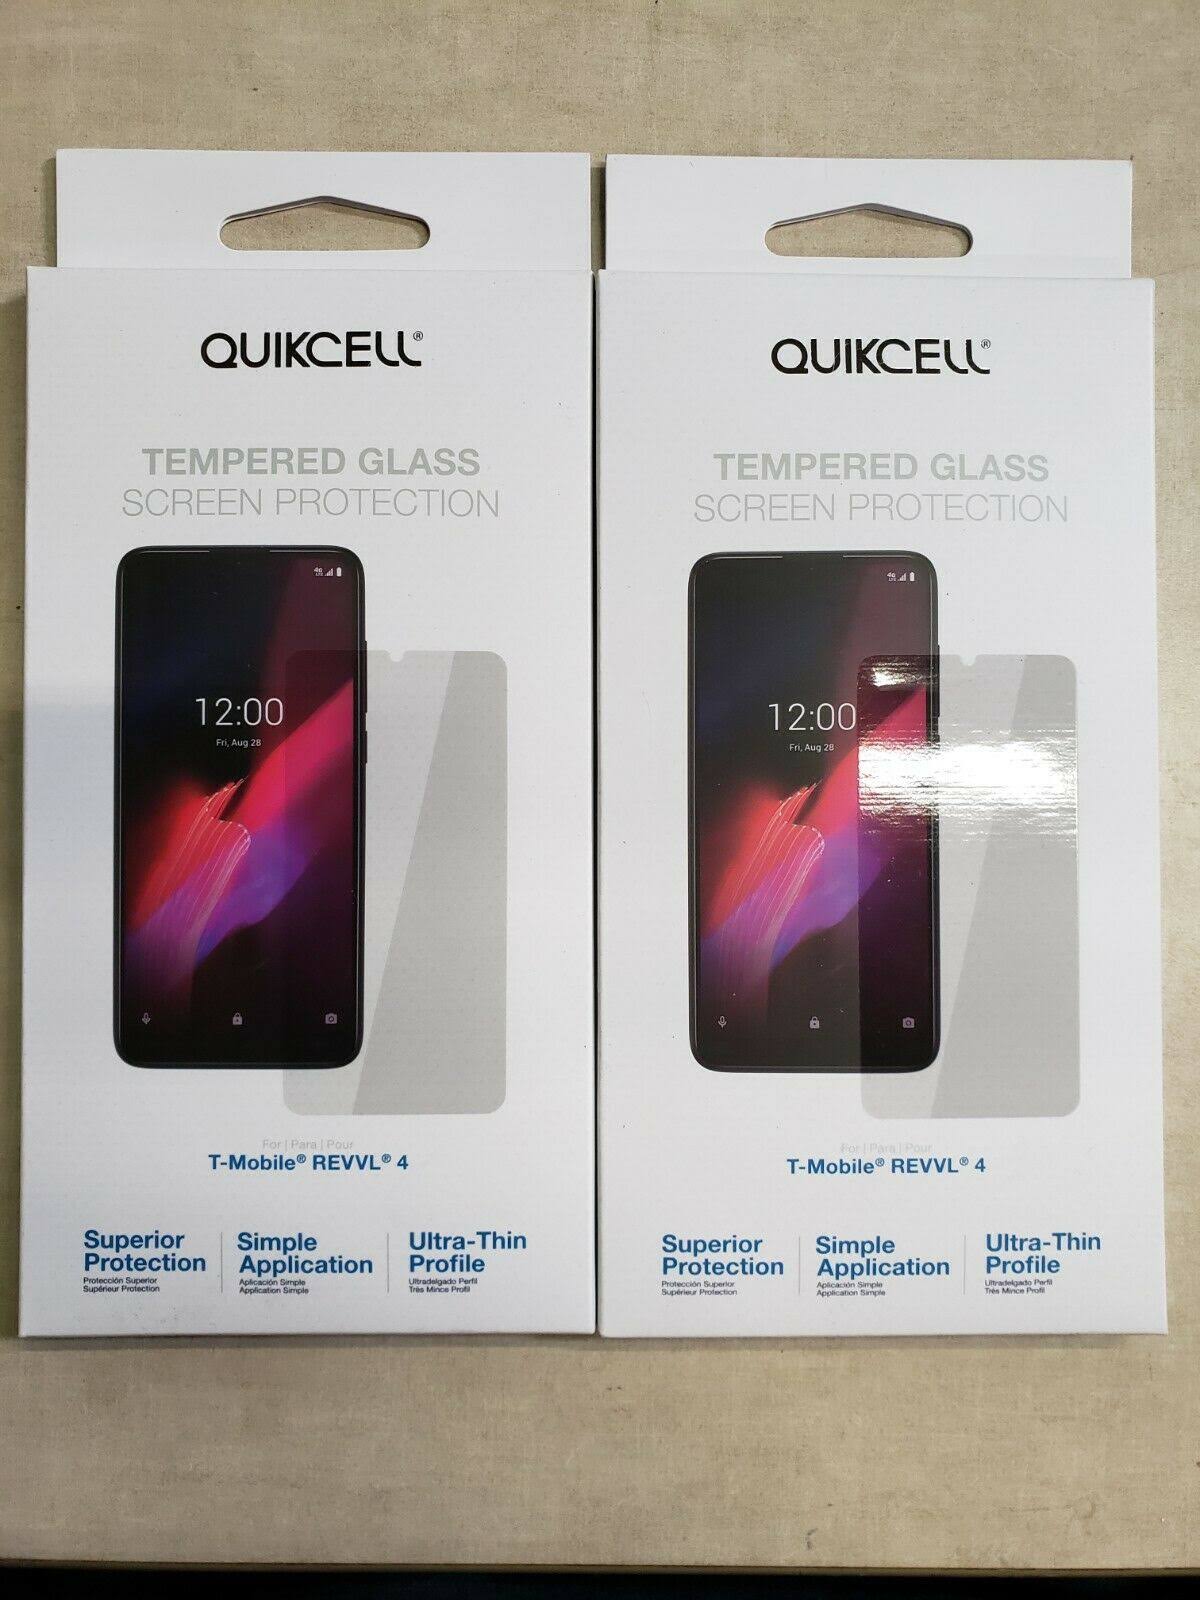 Lot of 2 - Quickcell T-Mobile TCL Revvl 4 Tempered Glass Screen Protection